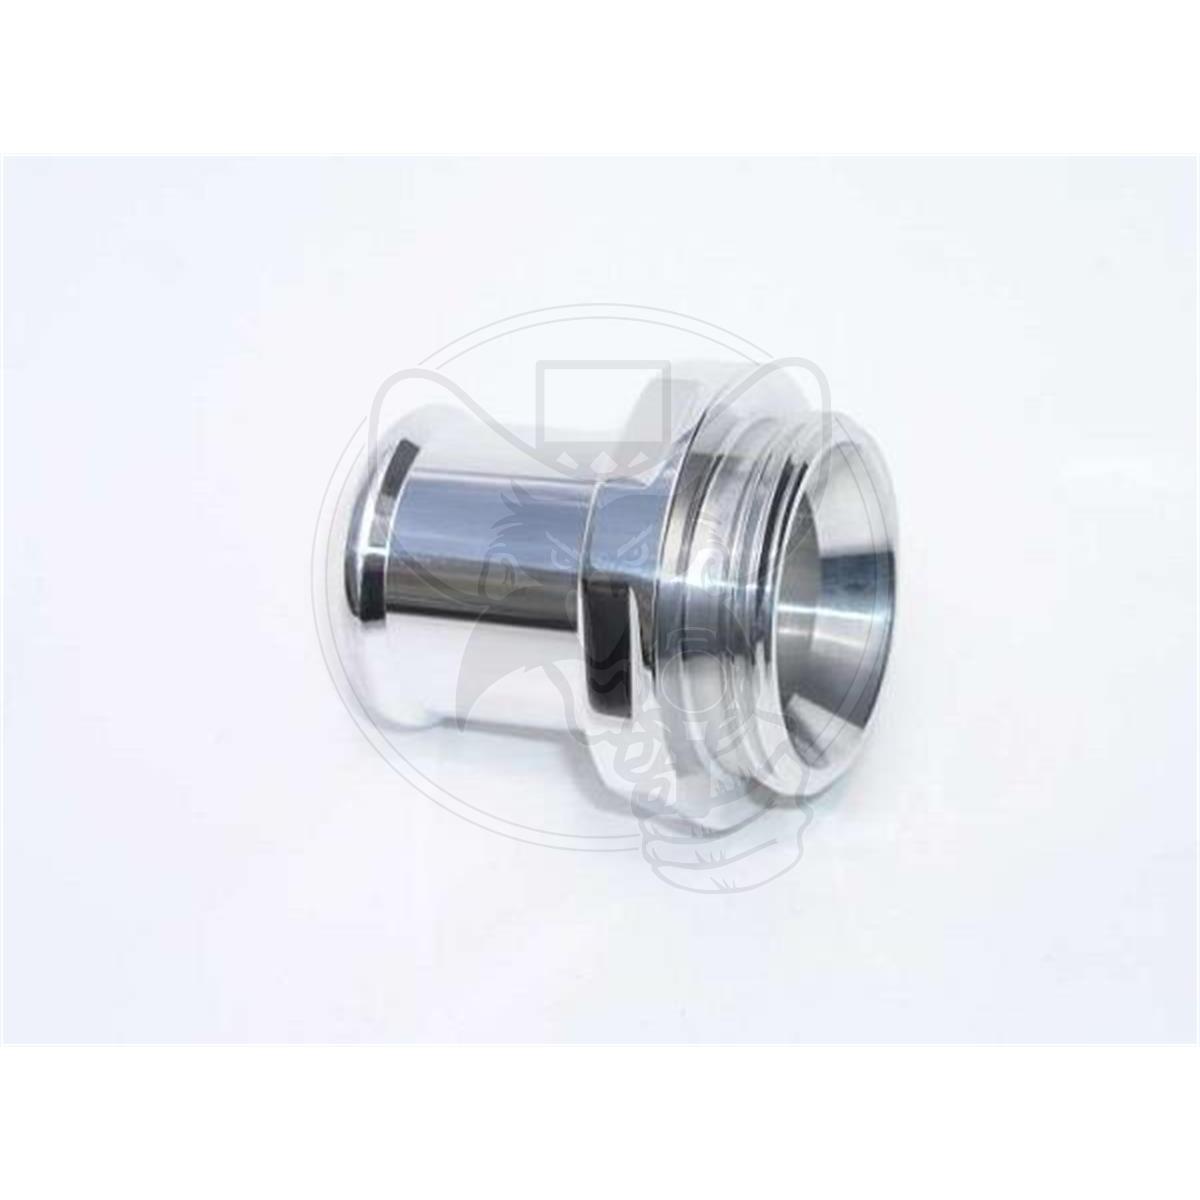 MEZIERE WATER NECK FITTING FOR 1-1/2" HOSE TO -20AN - POLISHED